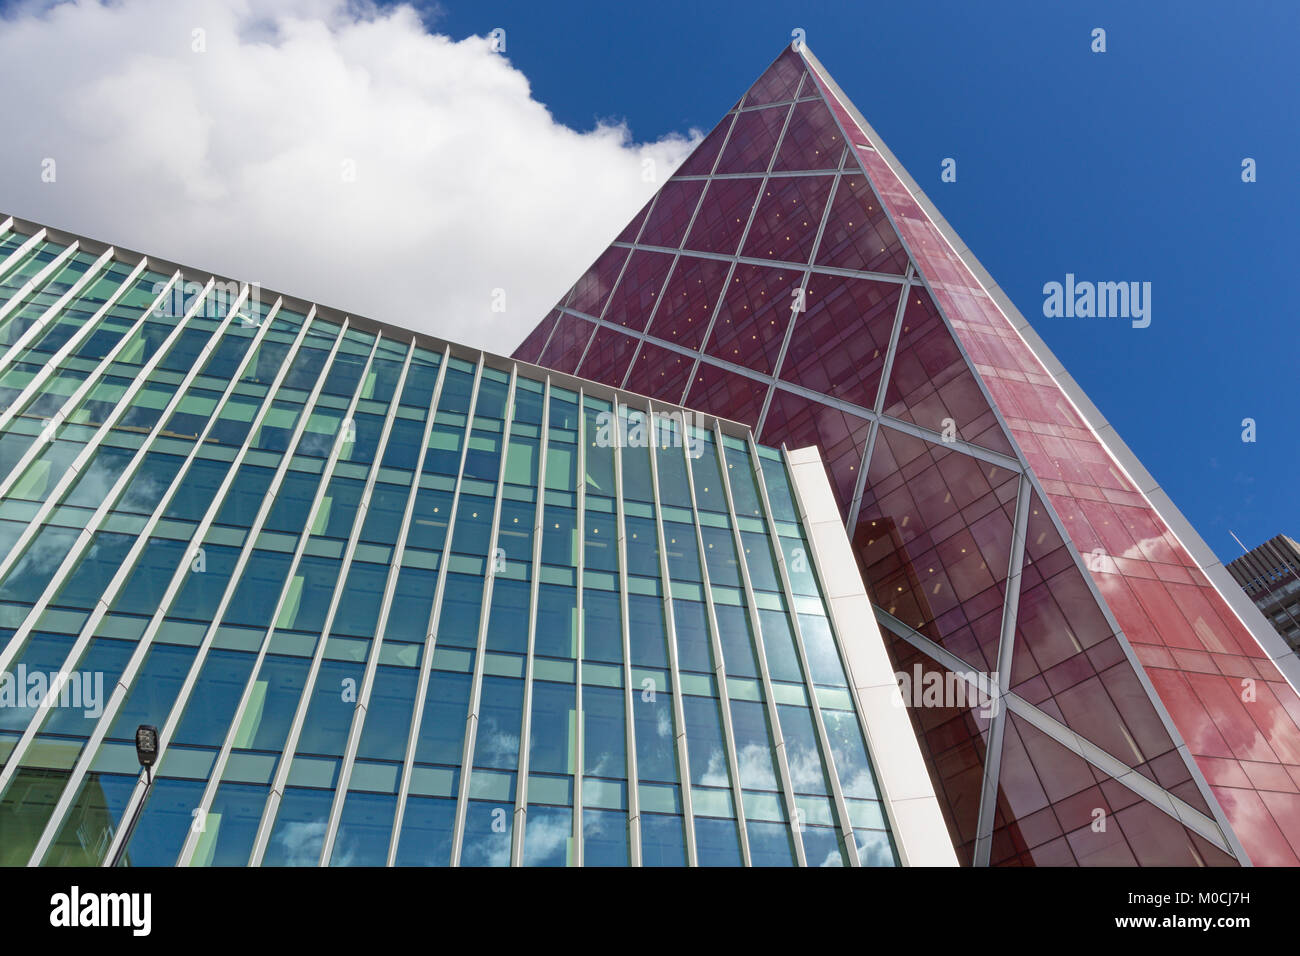 LONDON, GREAT BRITAIN - SEPTEMBER 13, 2017: The high building of Victoria street 160. Stock Photo